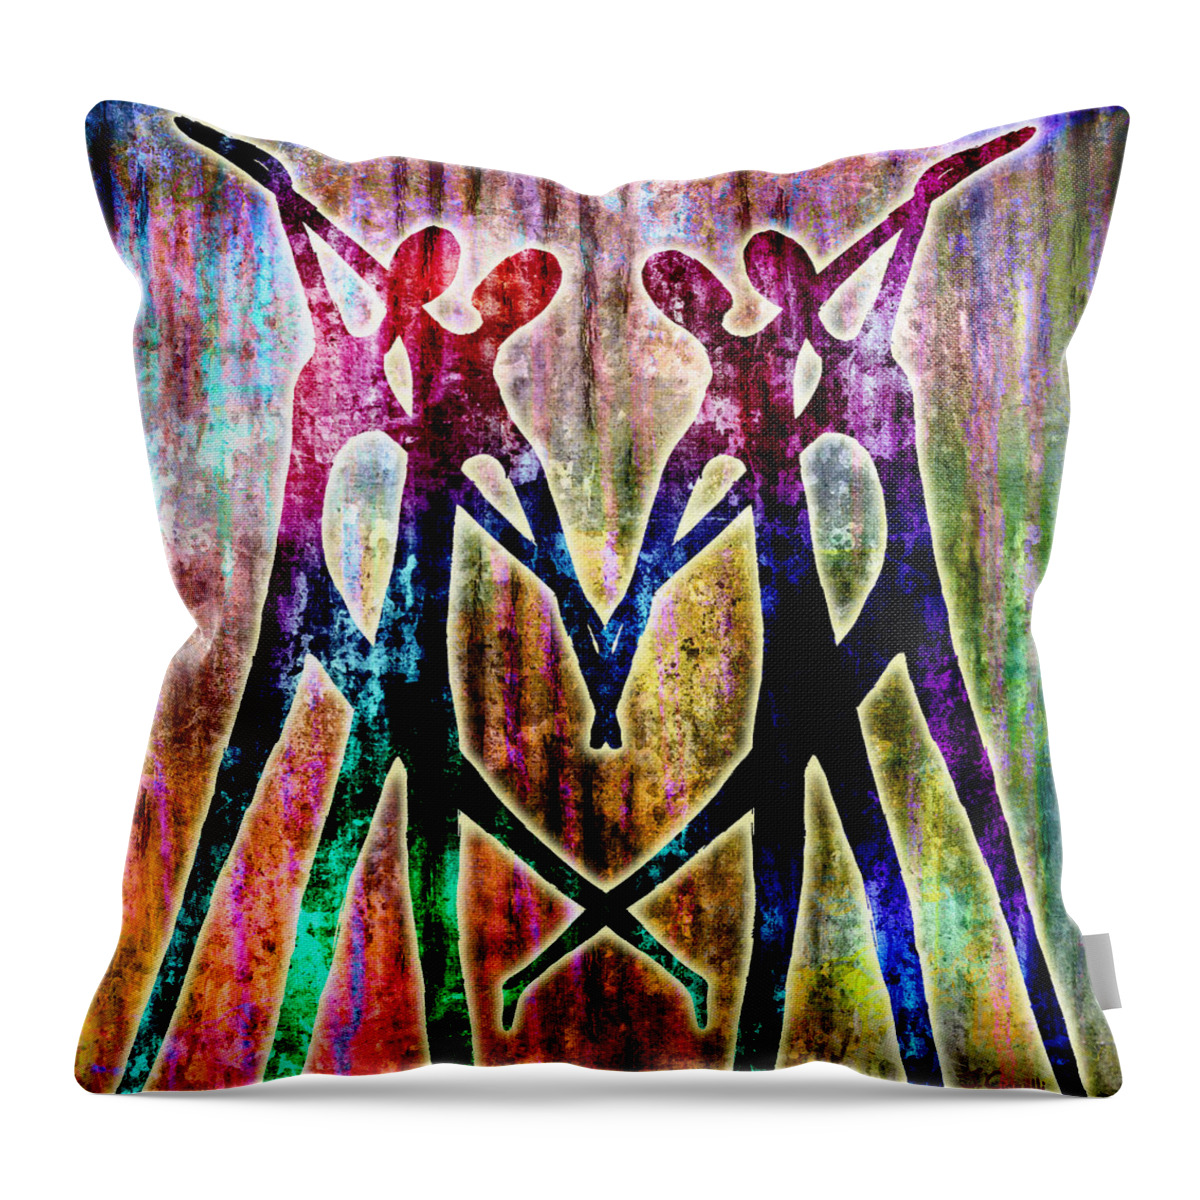 Colorful Throw Pillow featuring the digital art Celebration by Jaison Cianelli